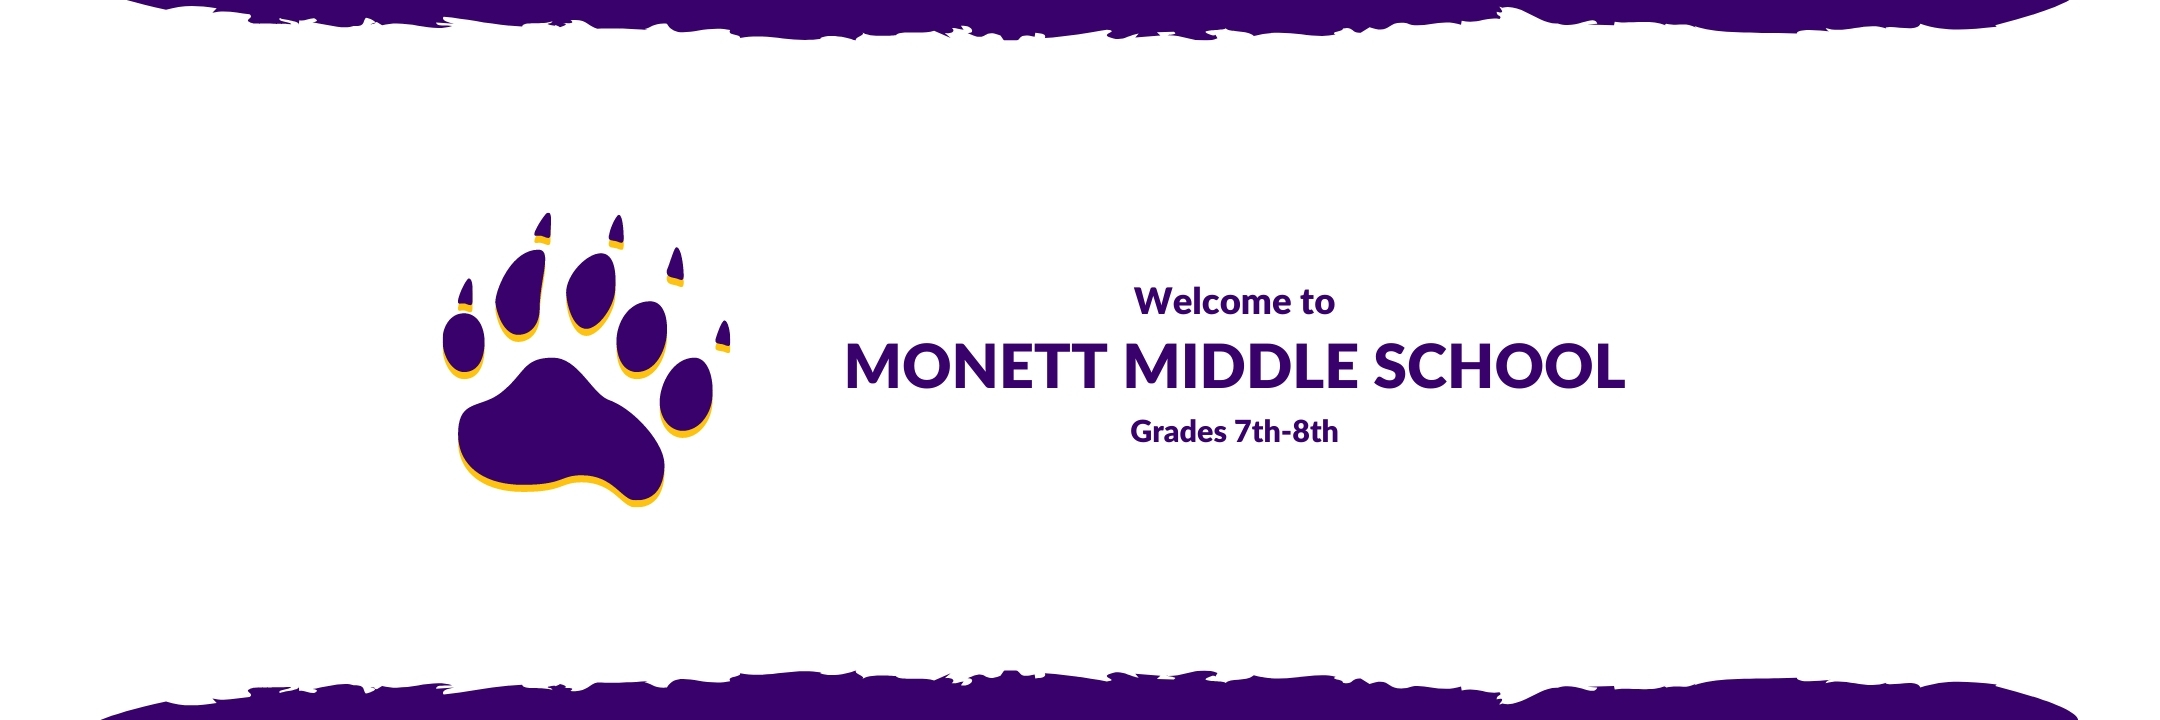 Welcome to Monett Middle School